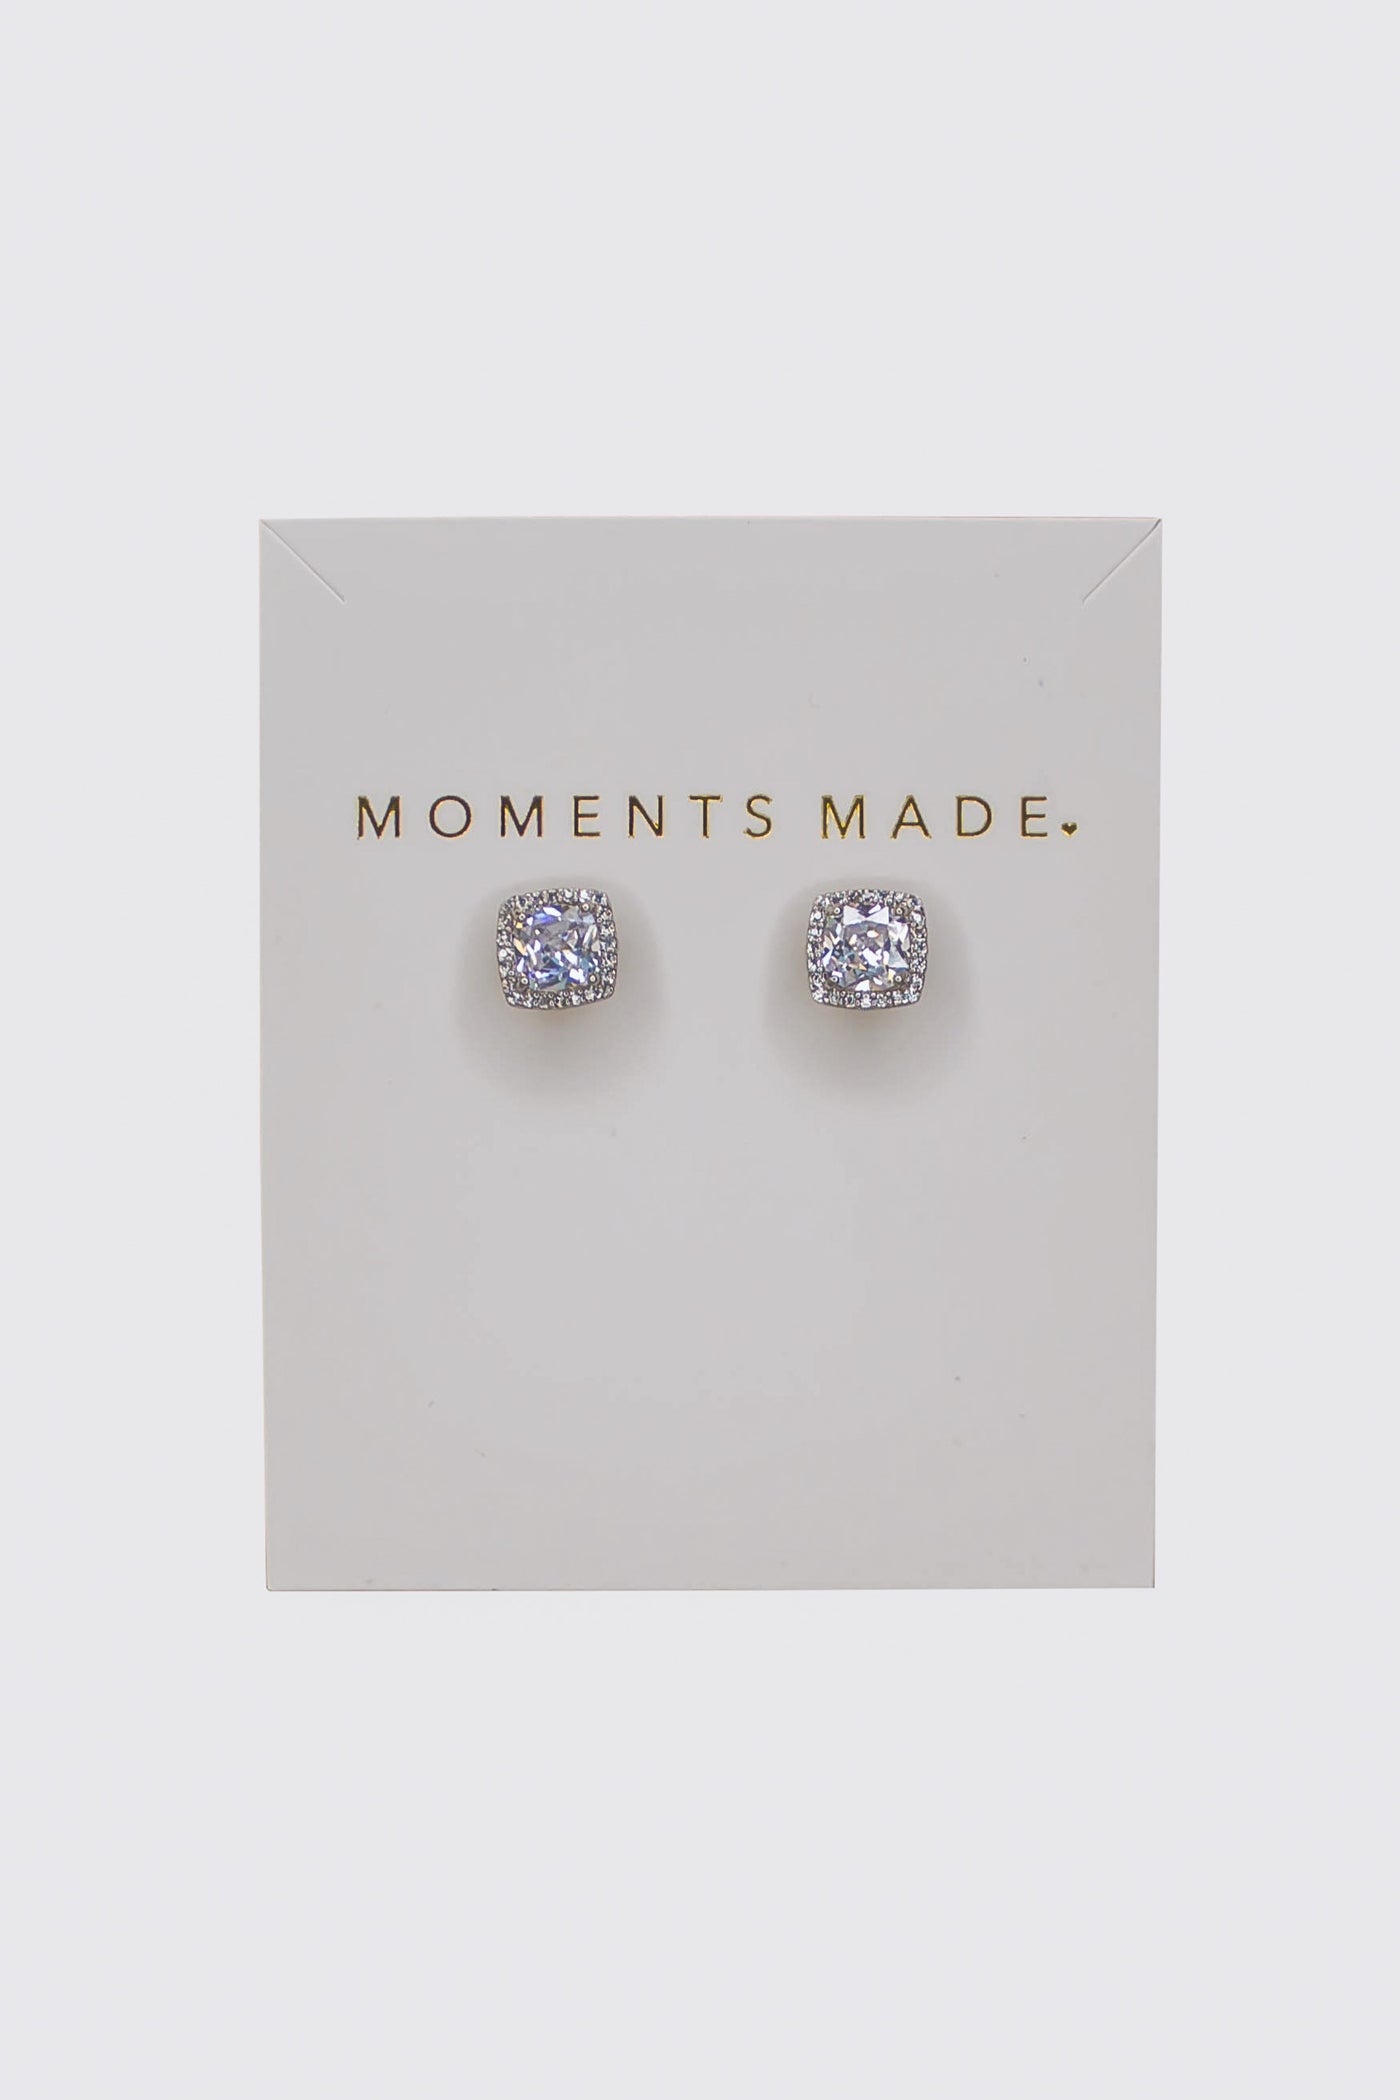 The earring is a cushion-cut crystal with a halo design.